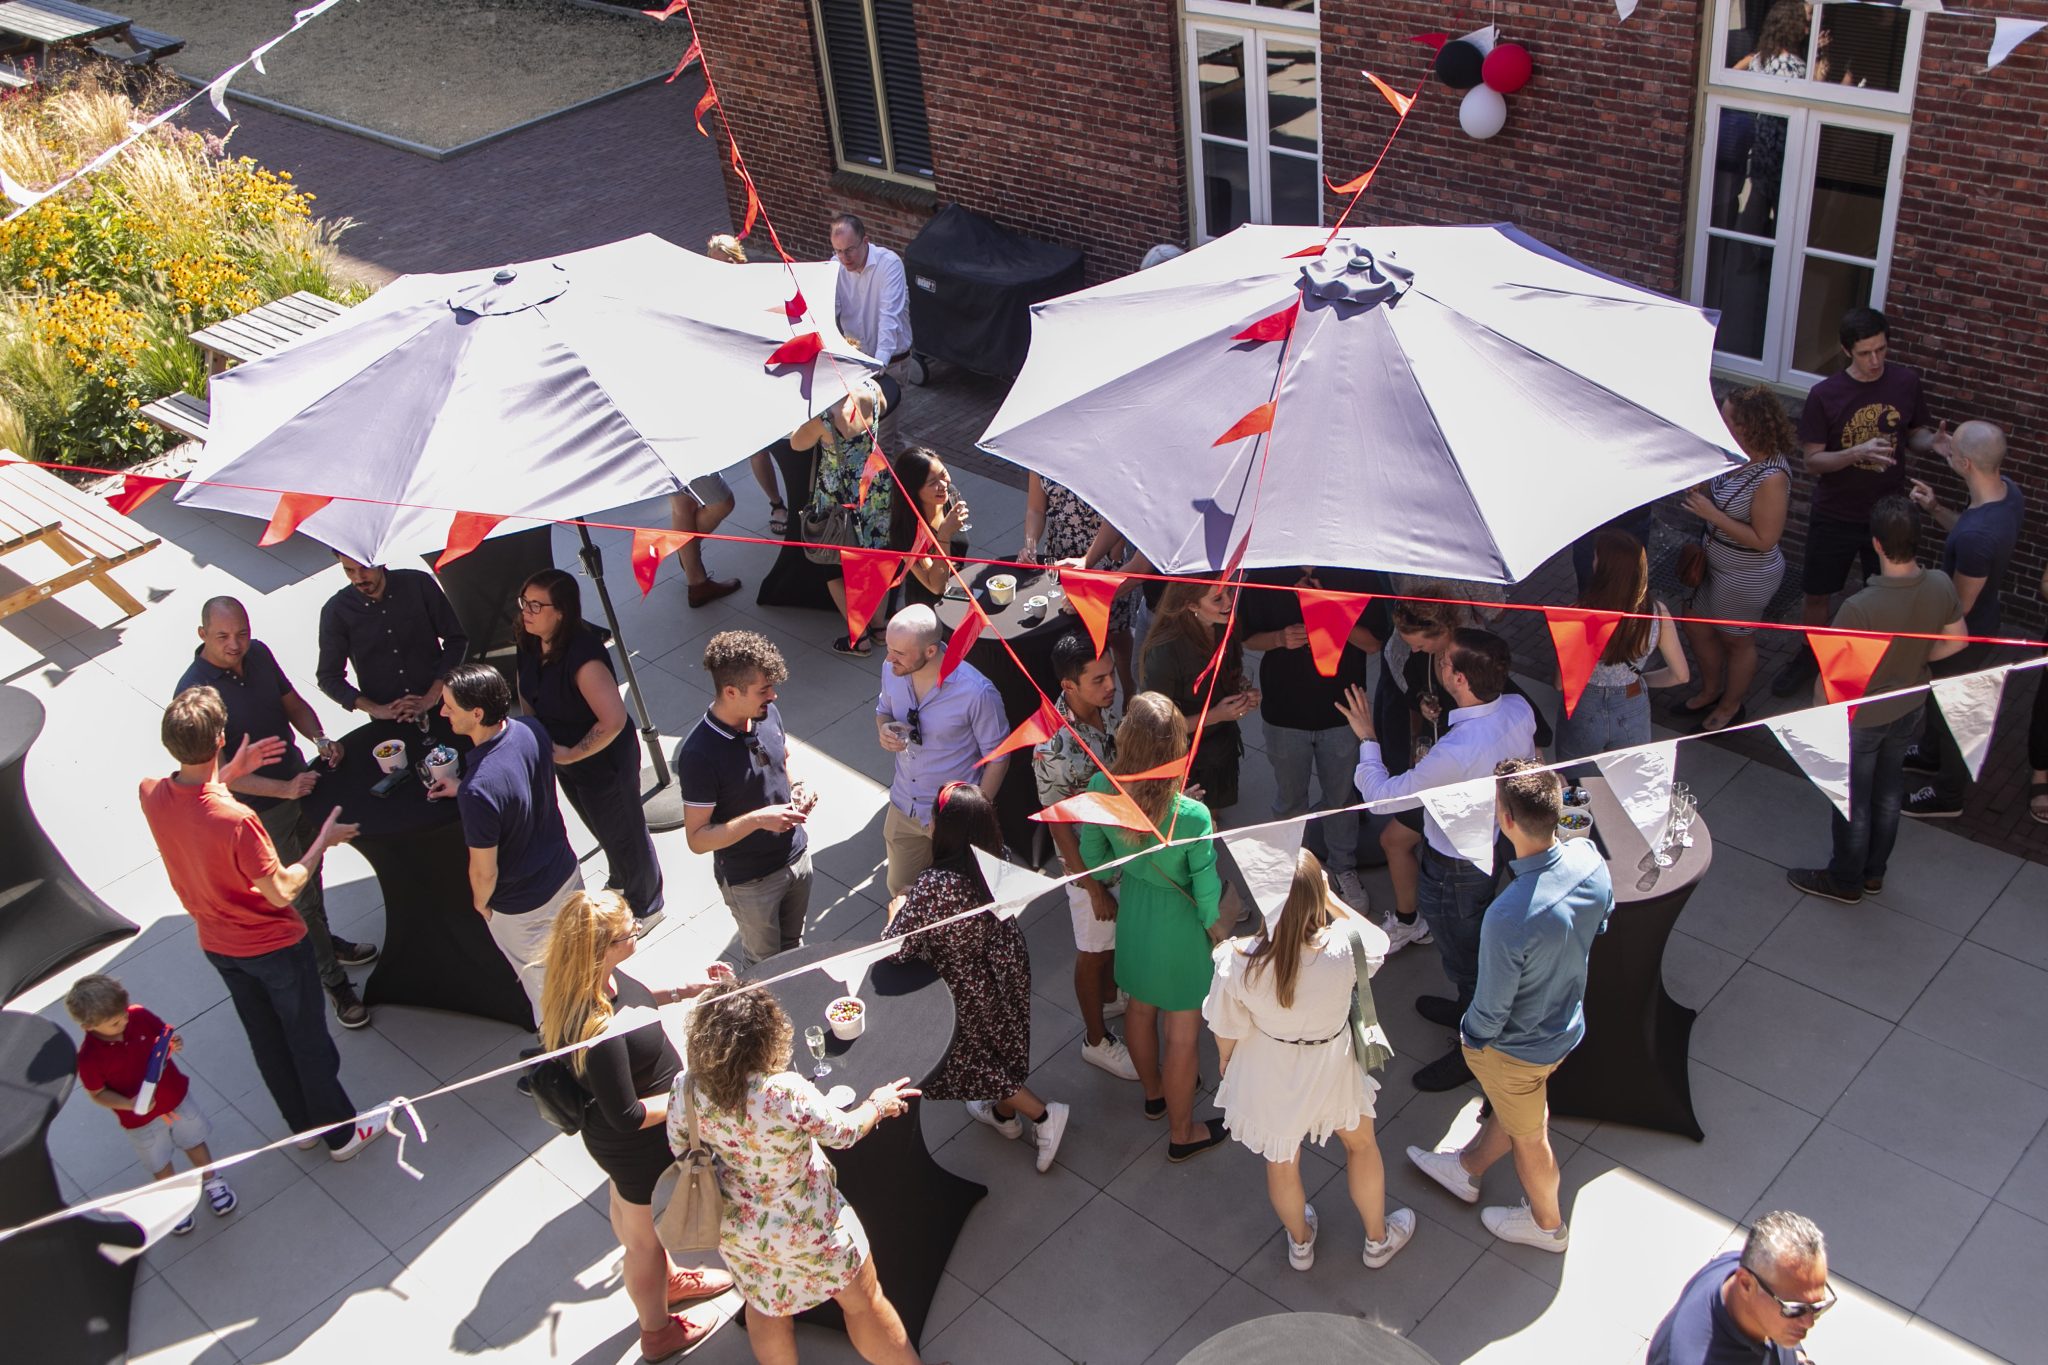 A group of people outside with parasols.